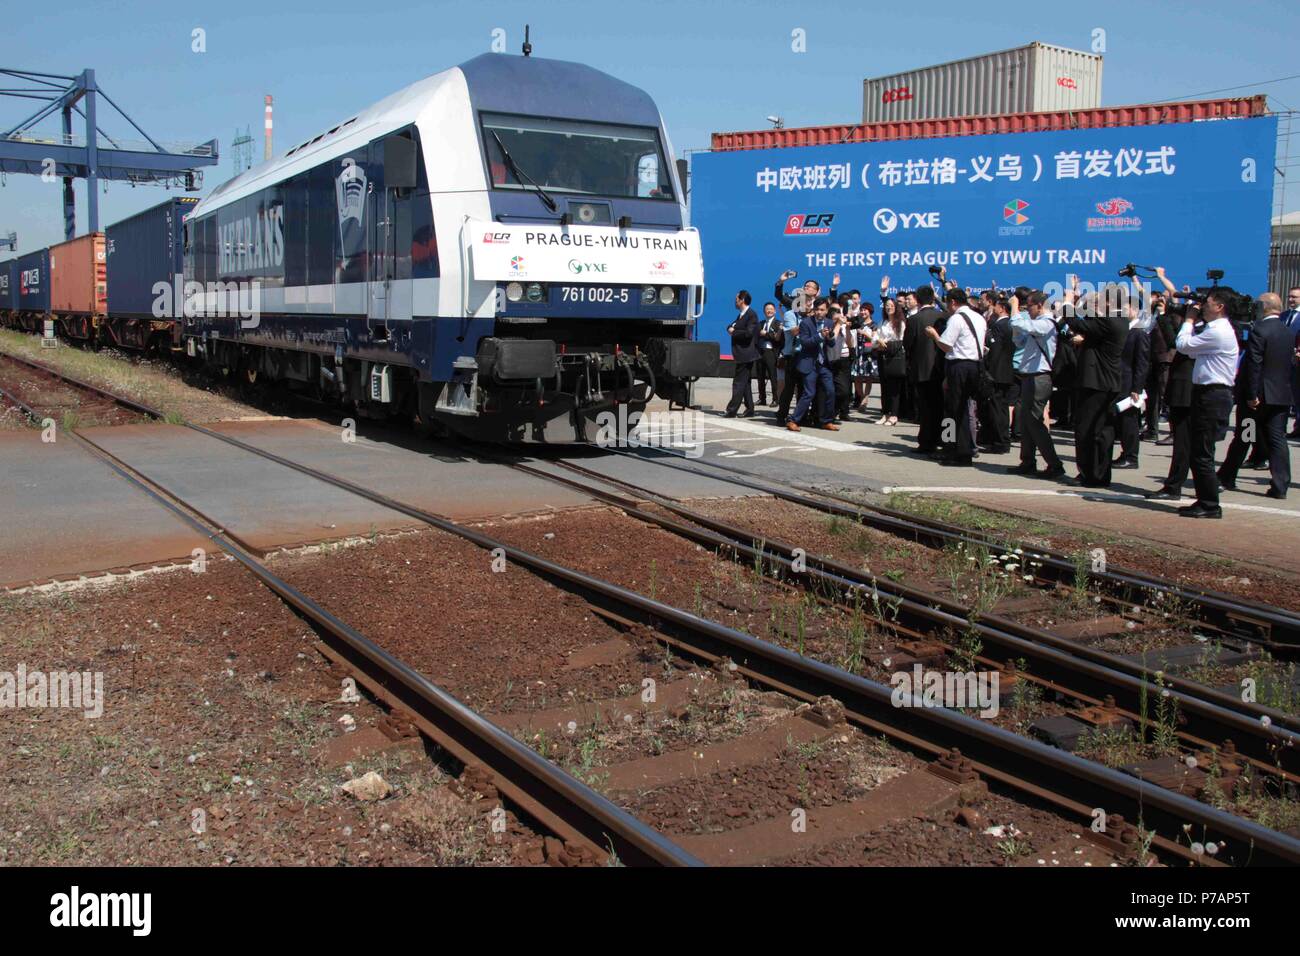 Beijing, China. 19th July, 2017. Photo taken on July 19, 2017 shows a freight train leaving for China's Yiwu, in Prague, the Czech Republic. TO GO WITH Xinhua Headlines: China to deliver stronger message for free trade as Premier Li visits Europe. Credit: Kesnerova/Xinhua/Alamy Live News Stock Photo